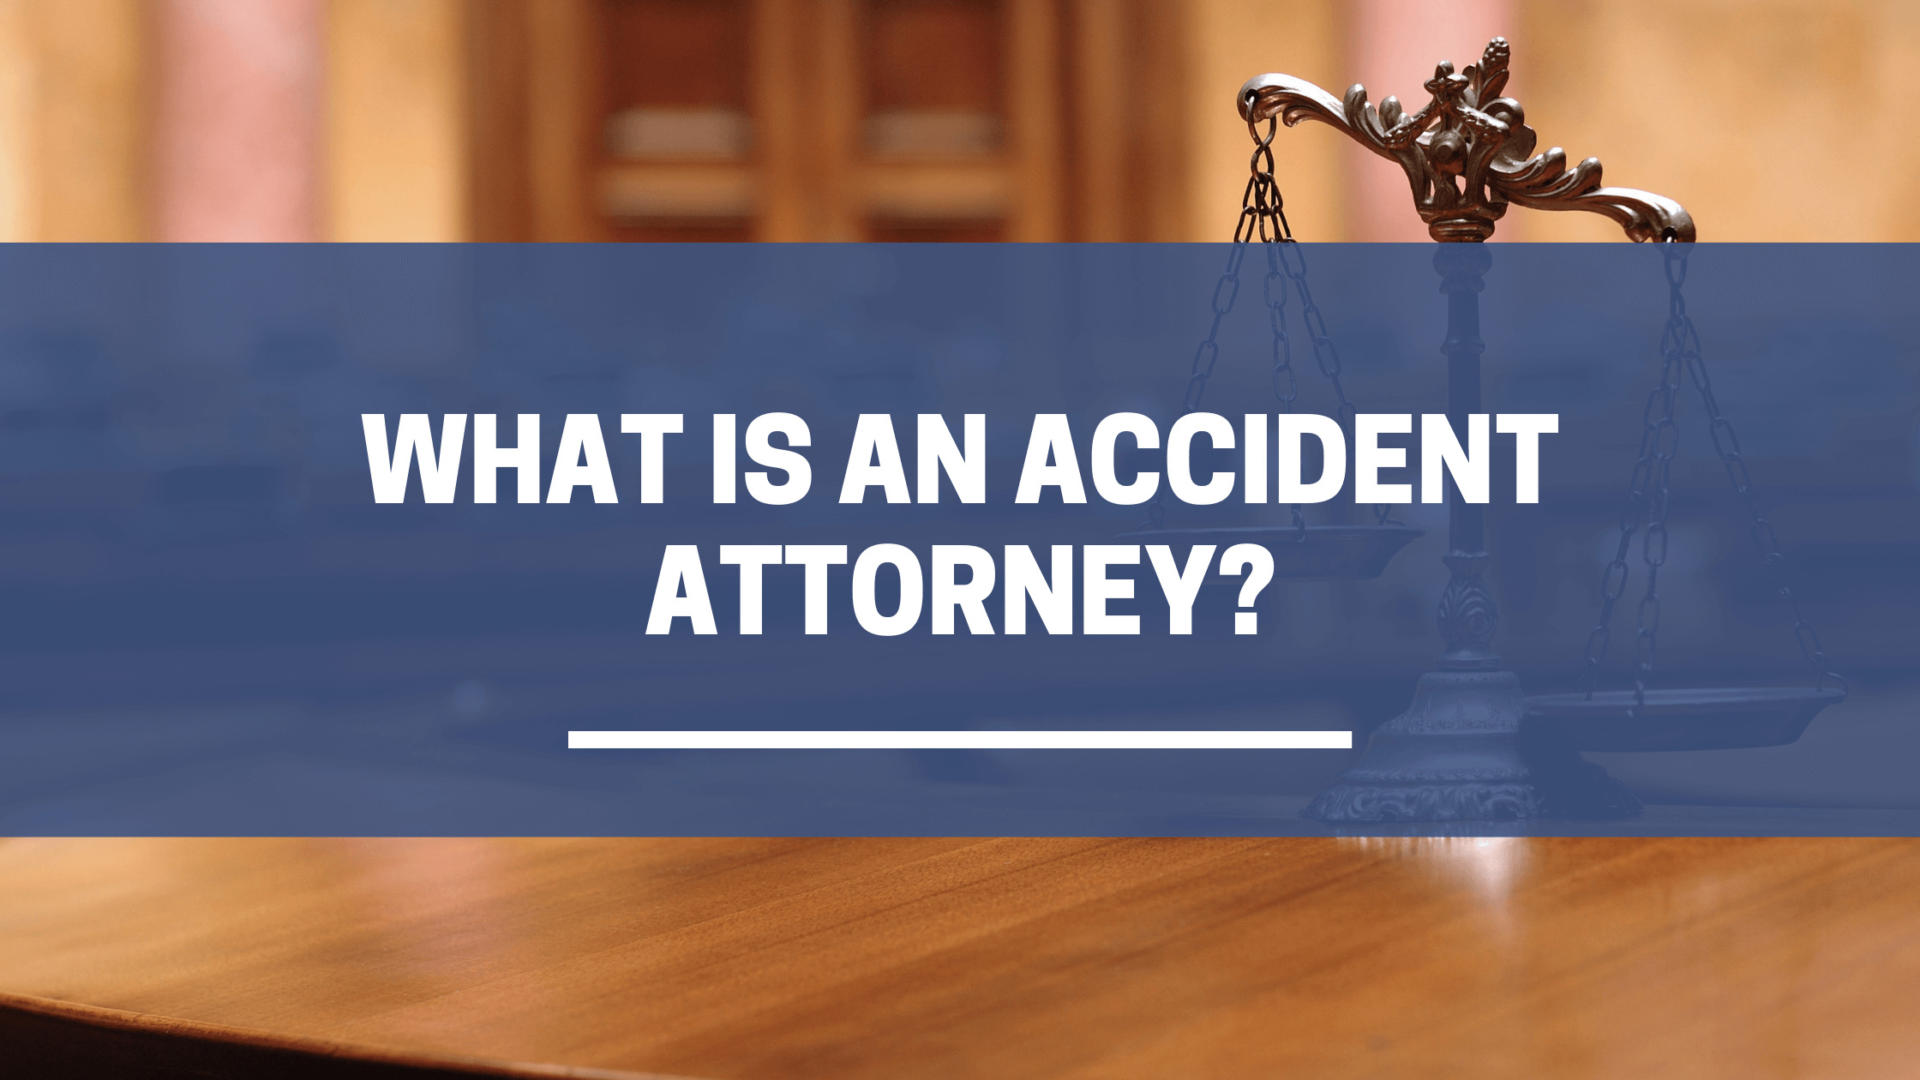 What is an accident attorney?